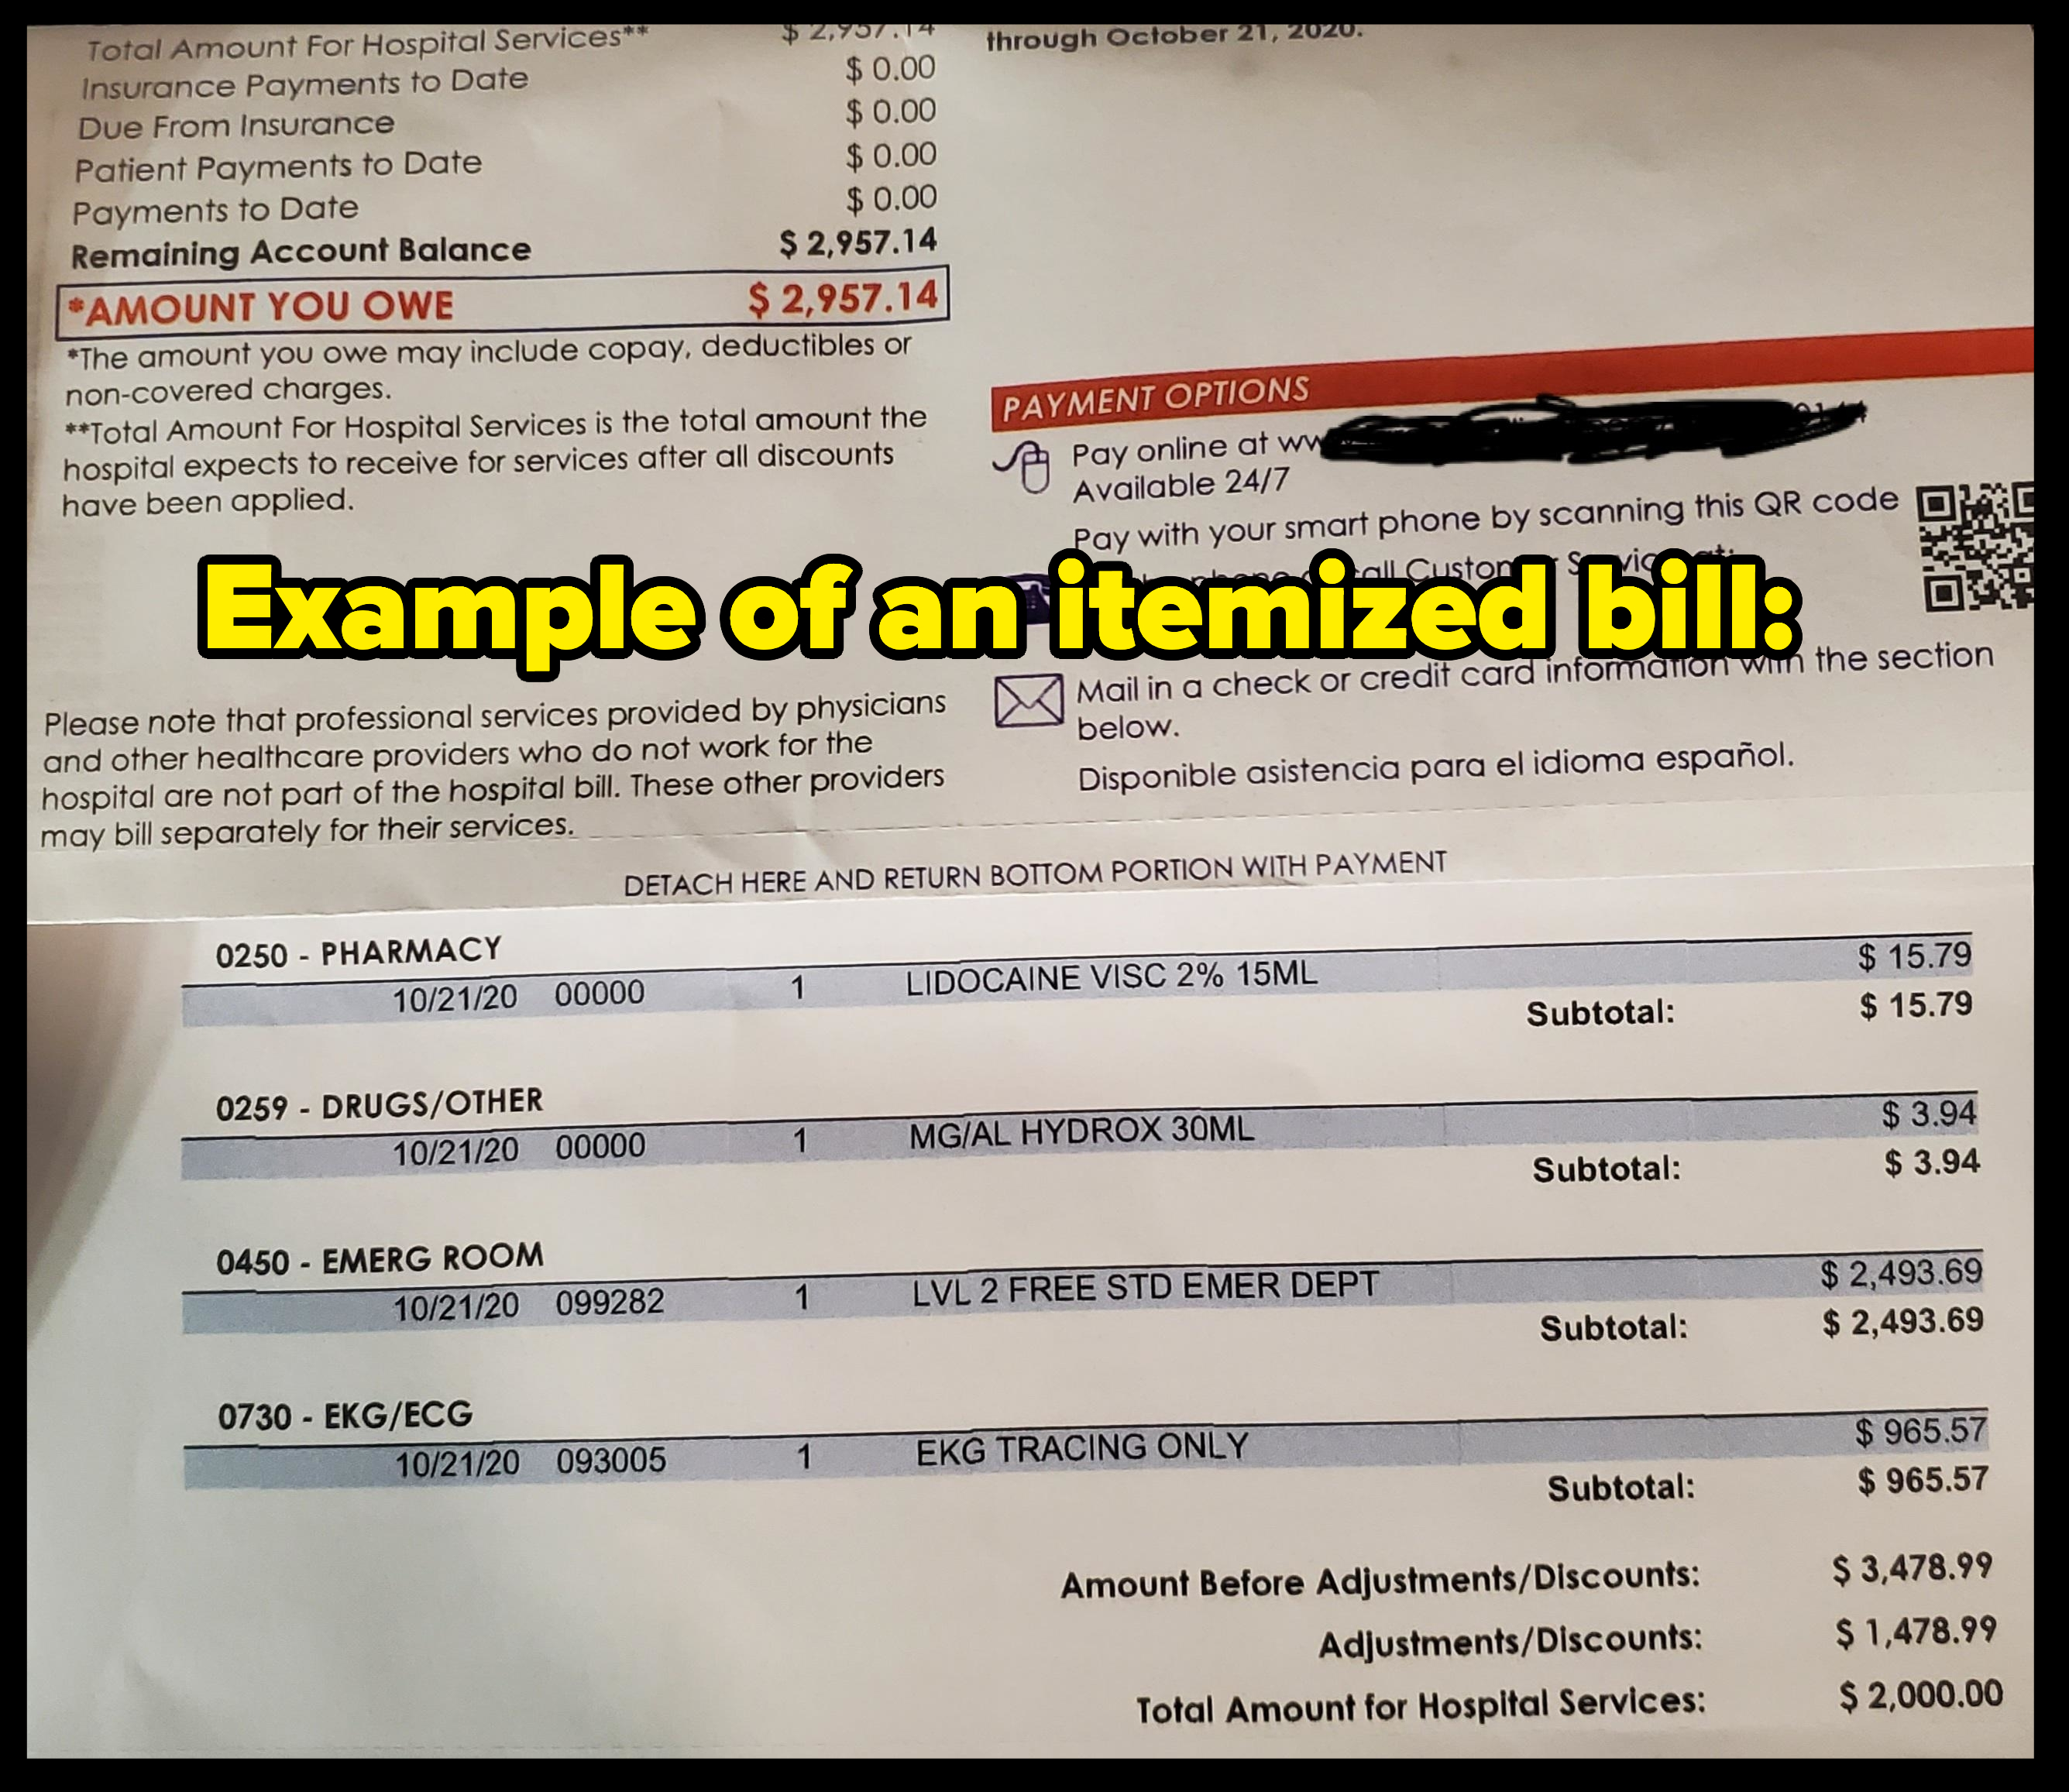 An example of an itemized bill